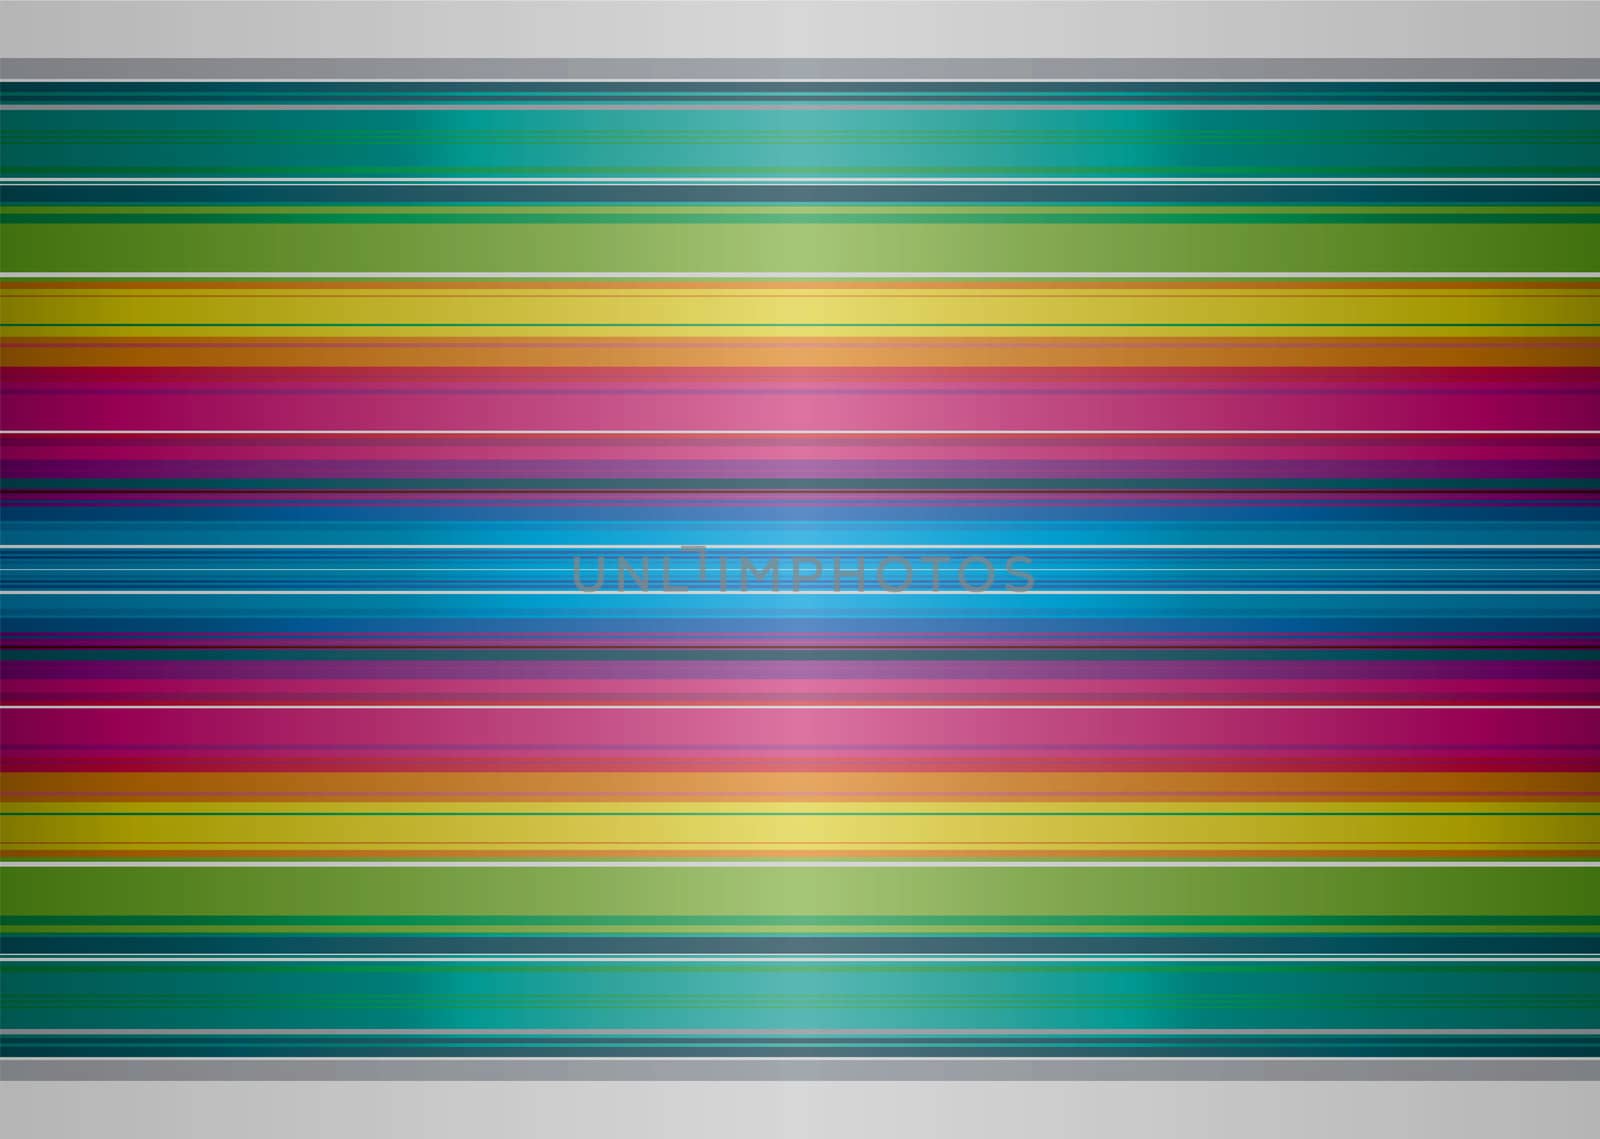 Brightly colored rainbow background with striped ribbon effect